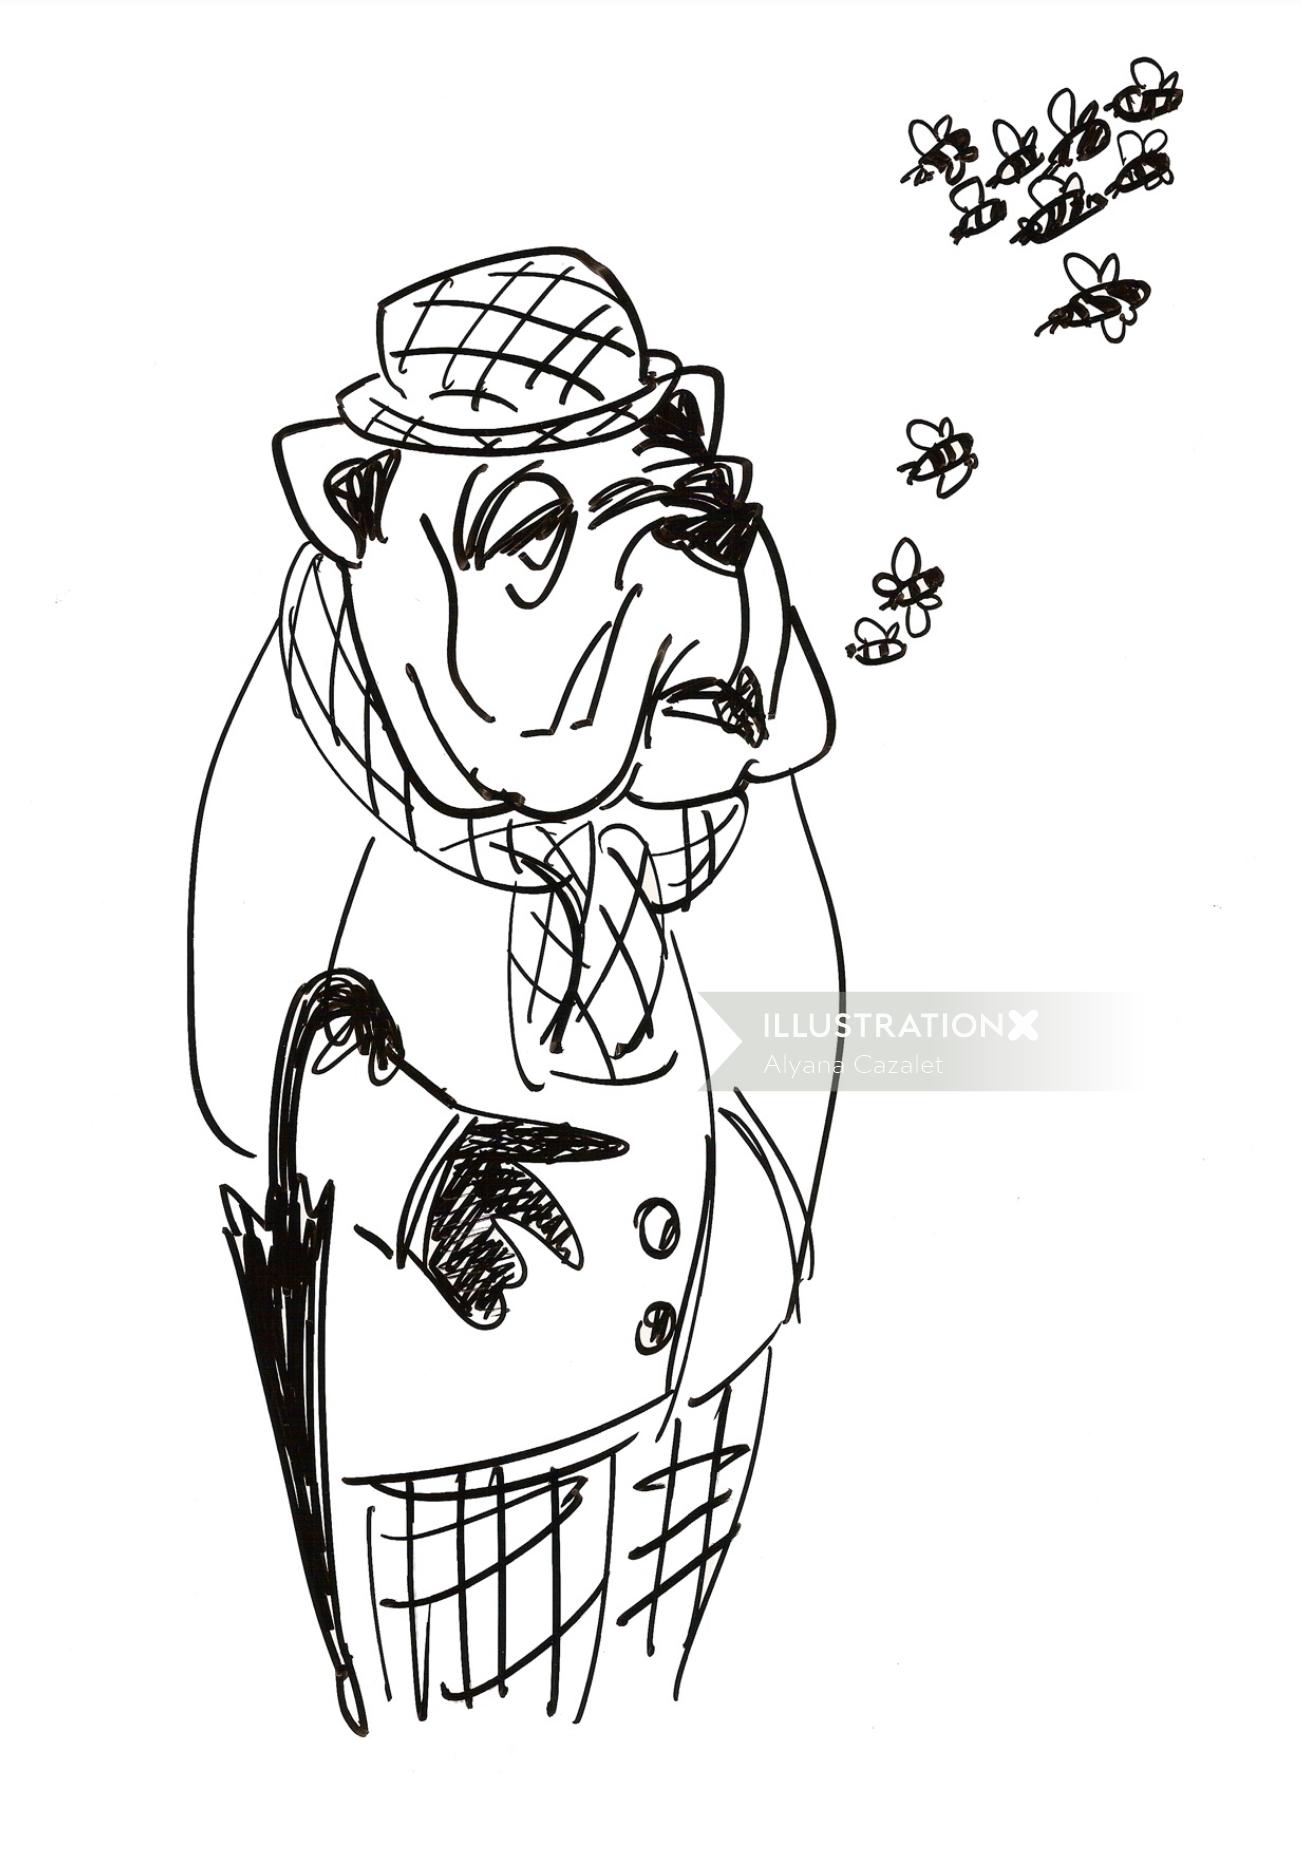 Caricature of man with dog face